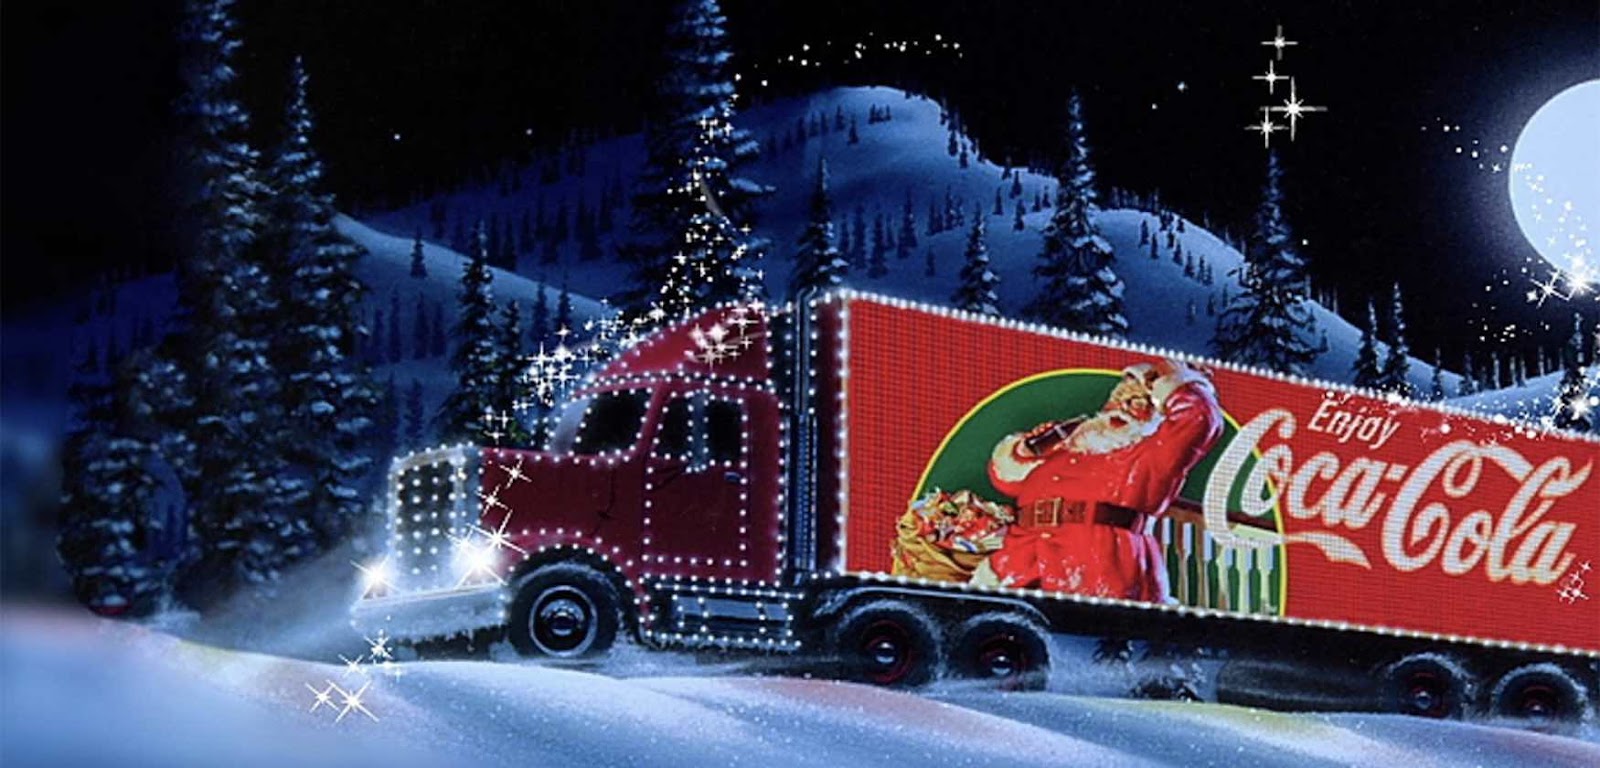 Red truck with picture of Santa Claus on it traveling through a snowy area 